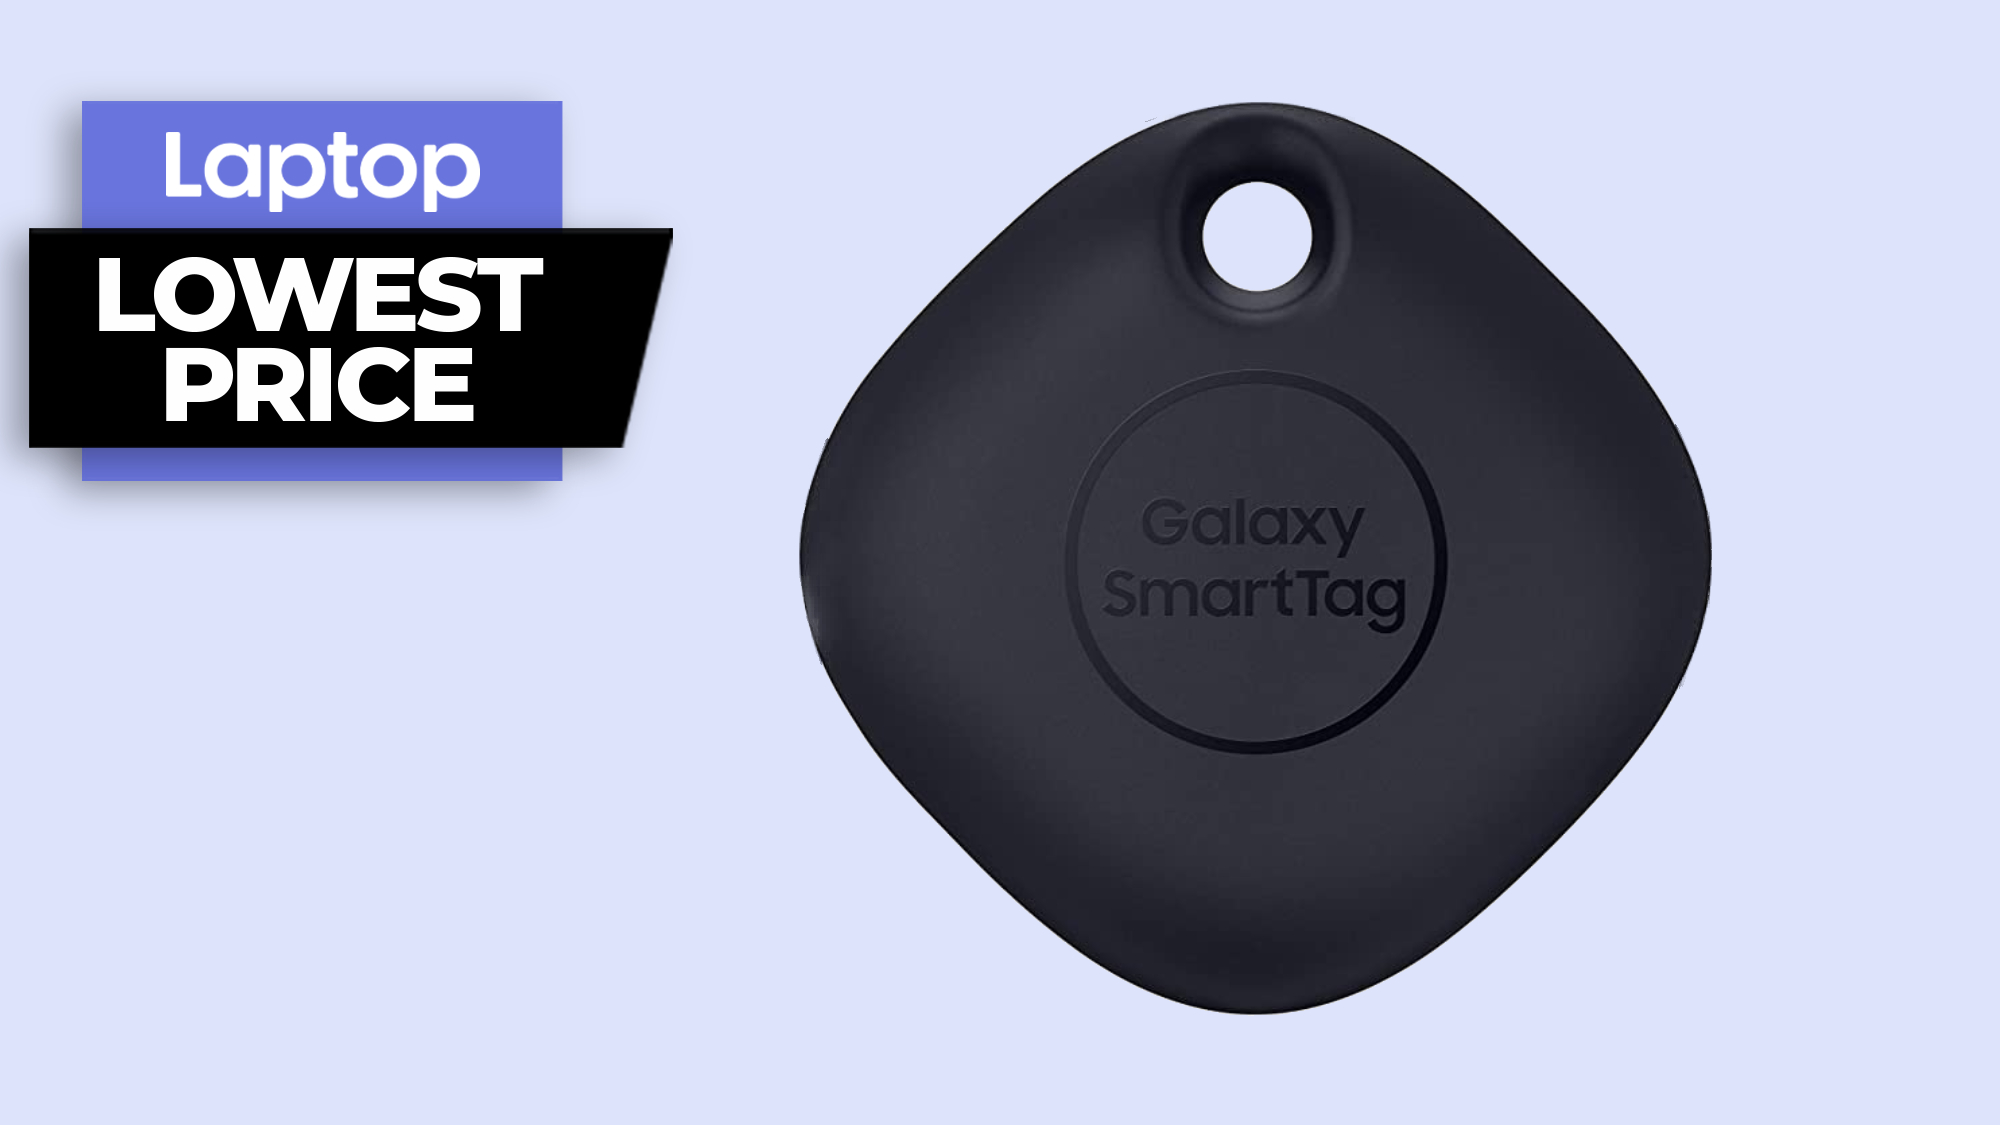 This Prime Day deal is out of this world: 40% off Samsung Galaxy SmartTag